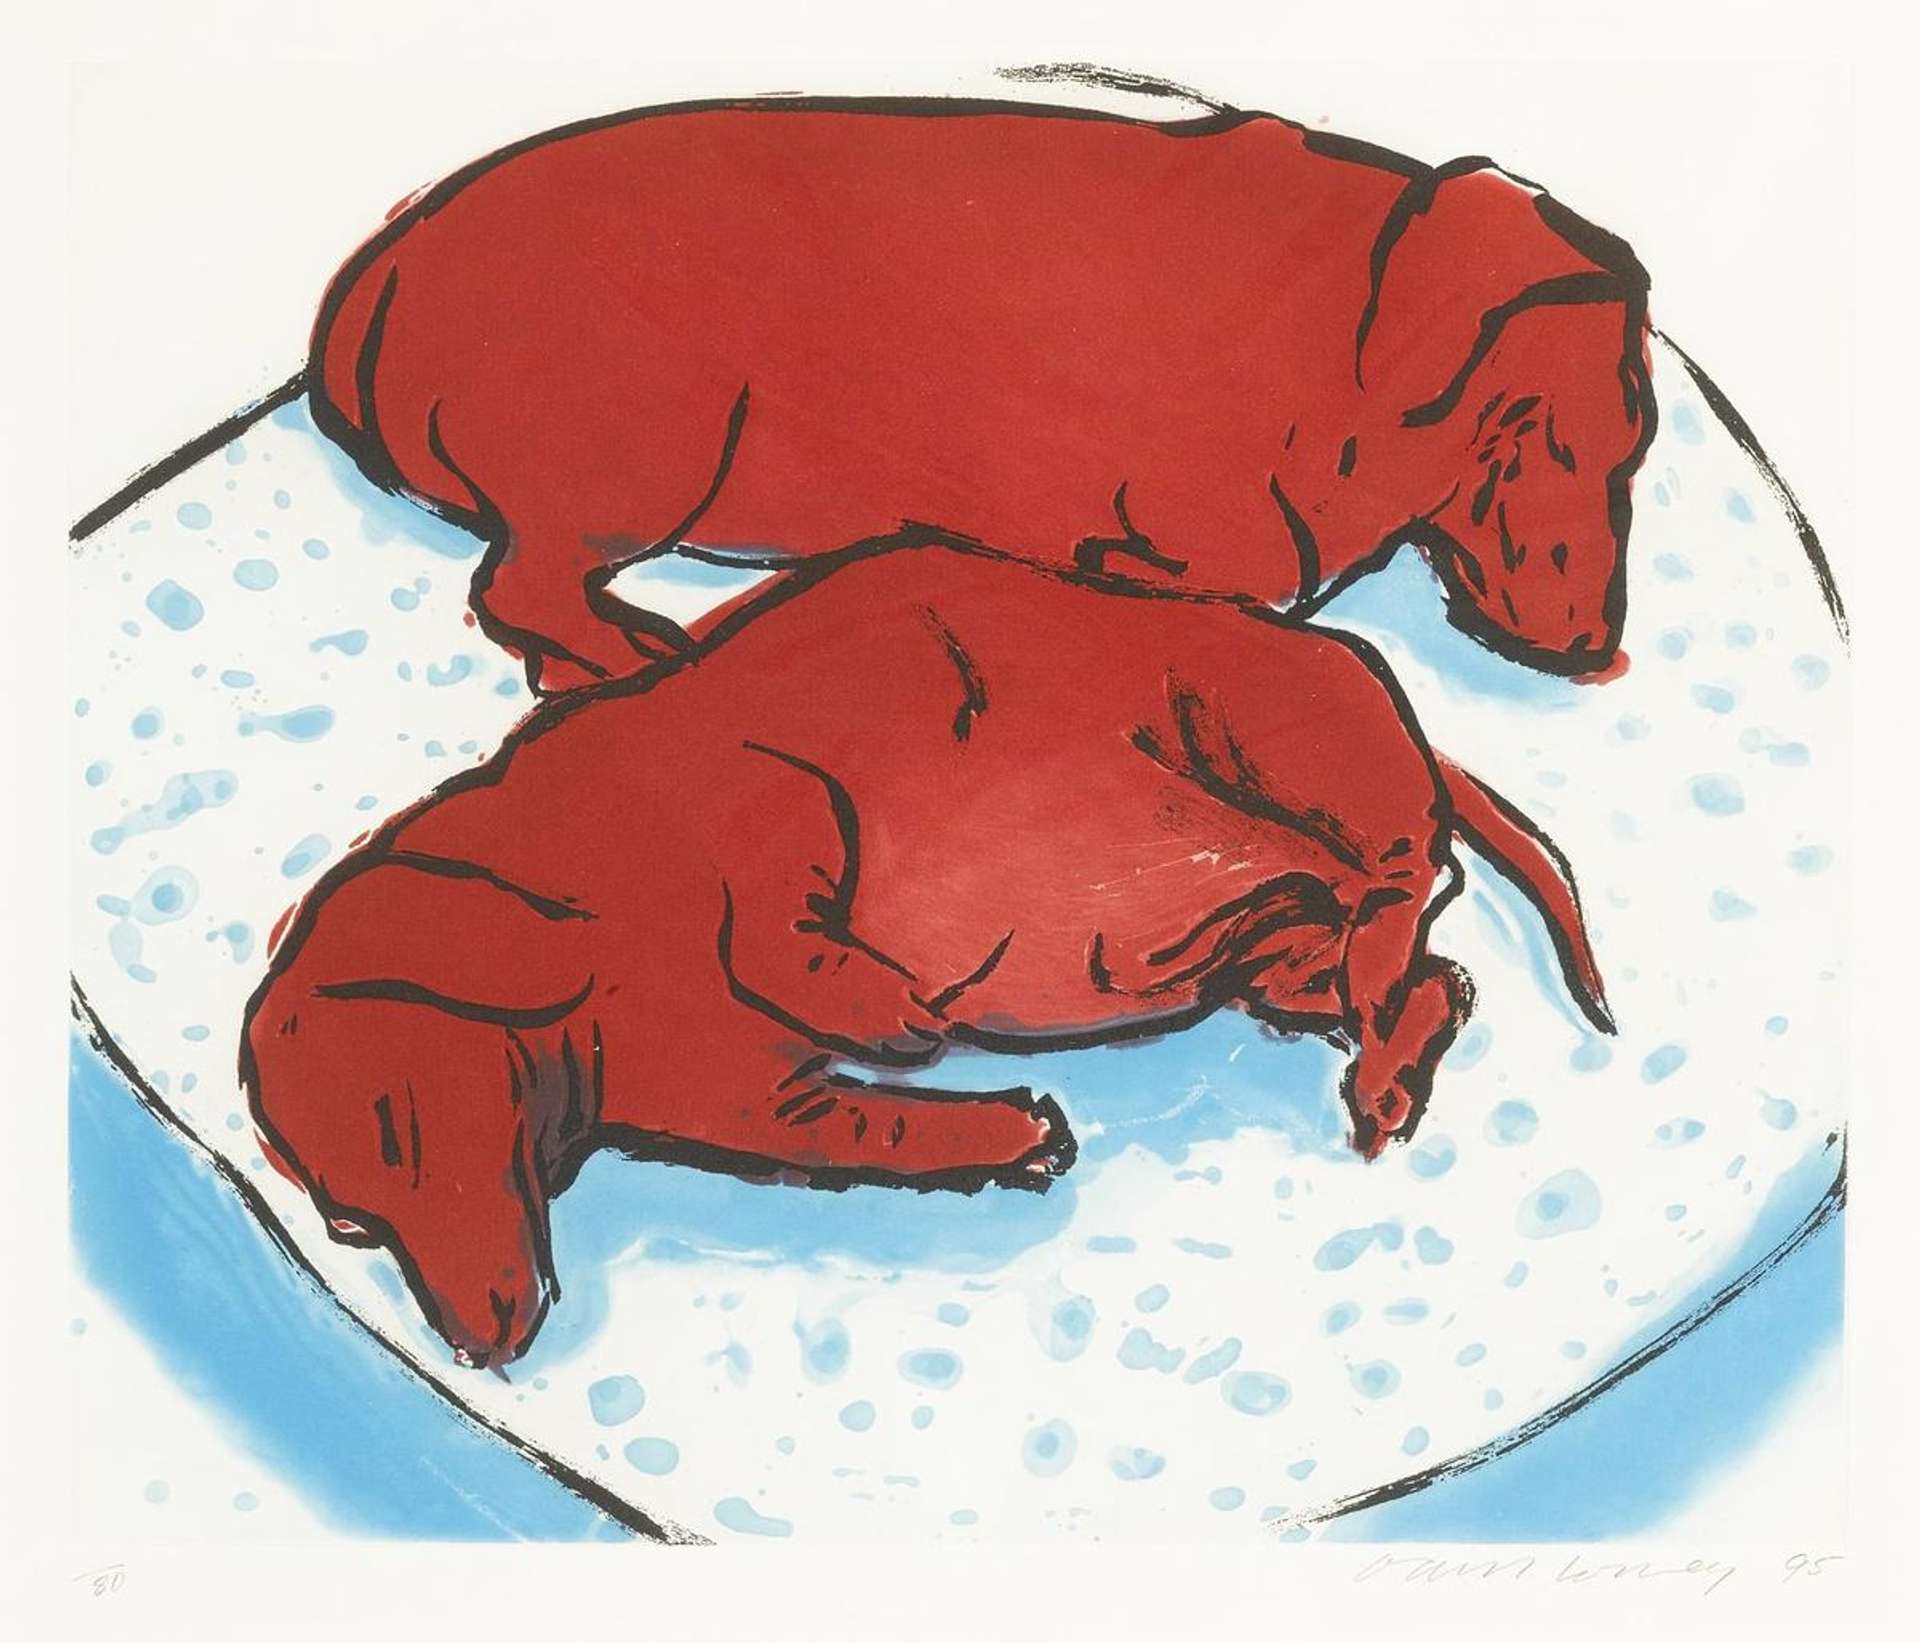 An intaglio print by David Hockney depicting the artist's two dachshunds, Stanley and Boodgie, in red against a pale blue and white background